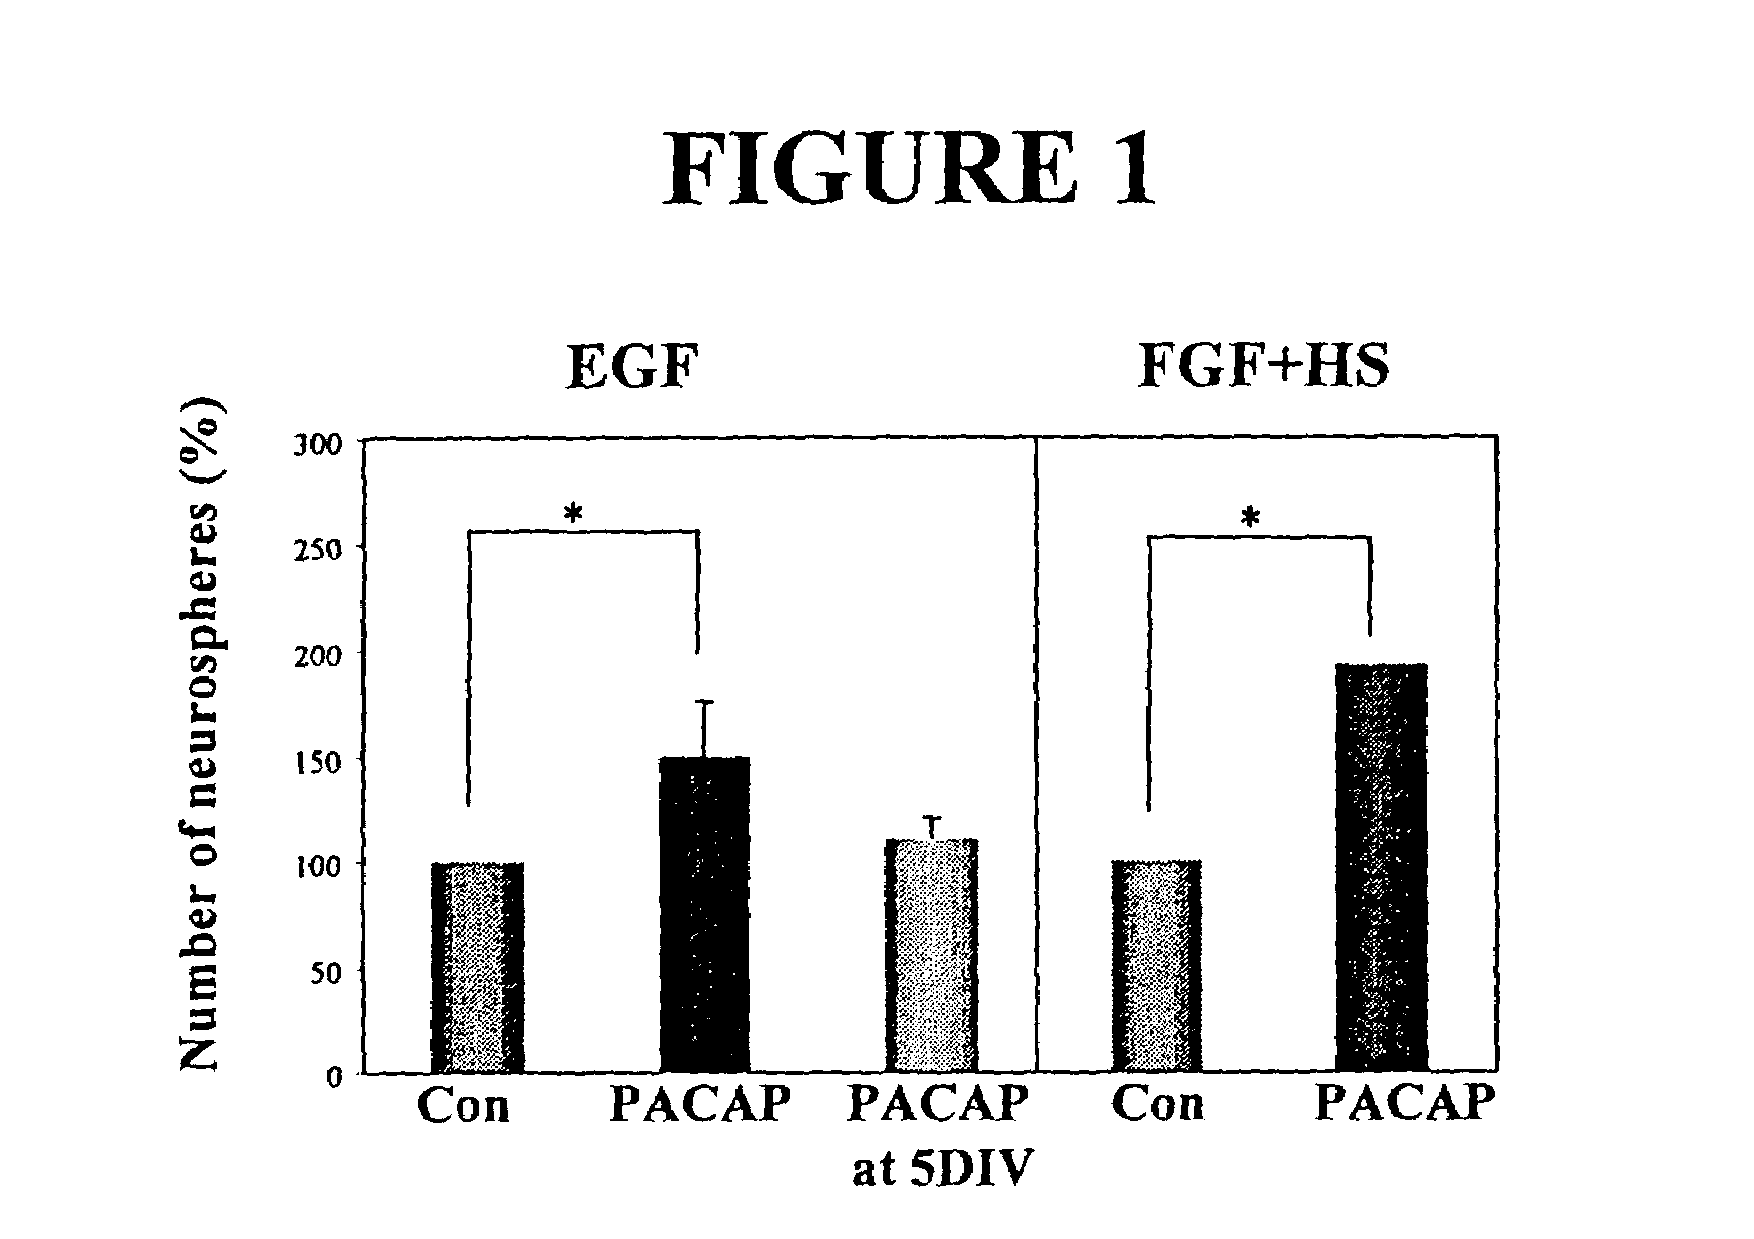 Method of enhancing neural stem cell proliferation, differentiation, and survival using pituitary adenylate cyclase activating polypeptide (PACAP)